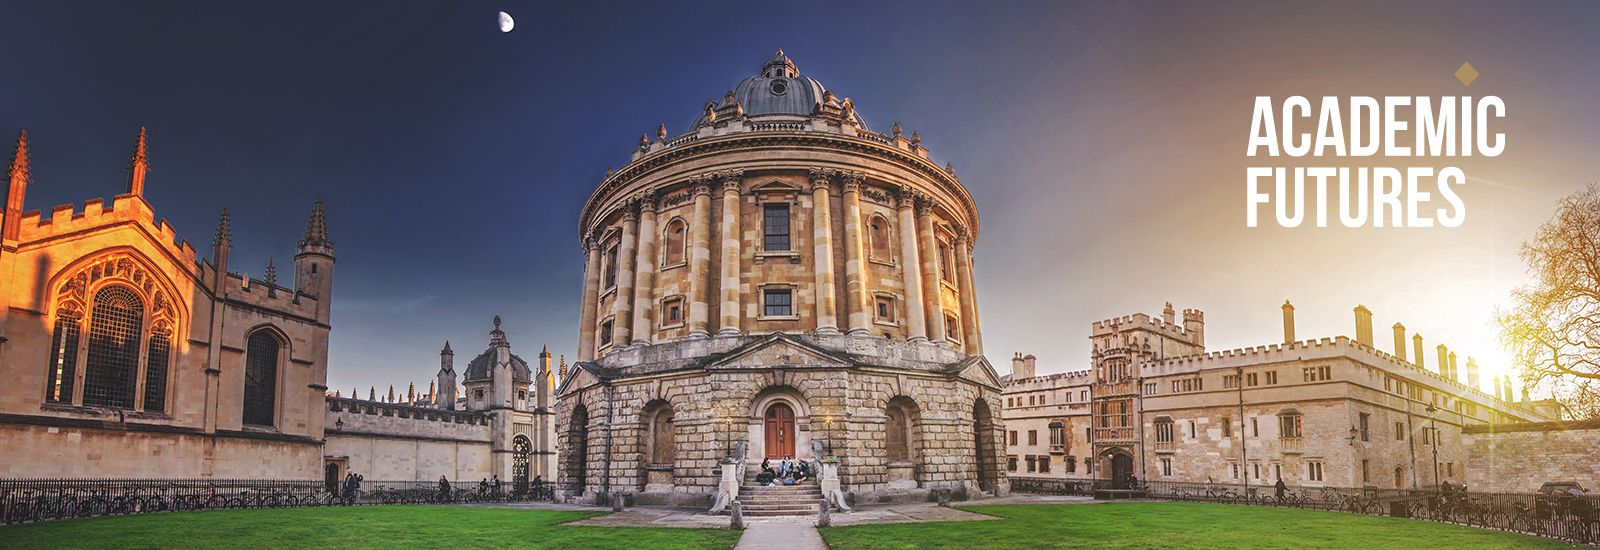 Radcliffe Camera in Radcliffe Square Oxford at dawn with Academic Futures logo